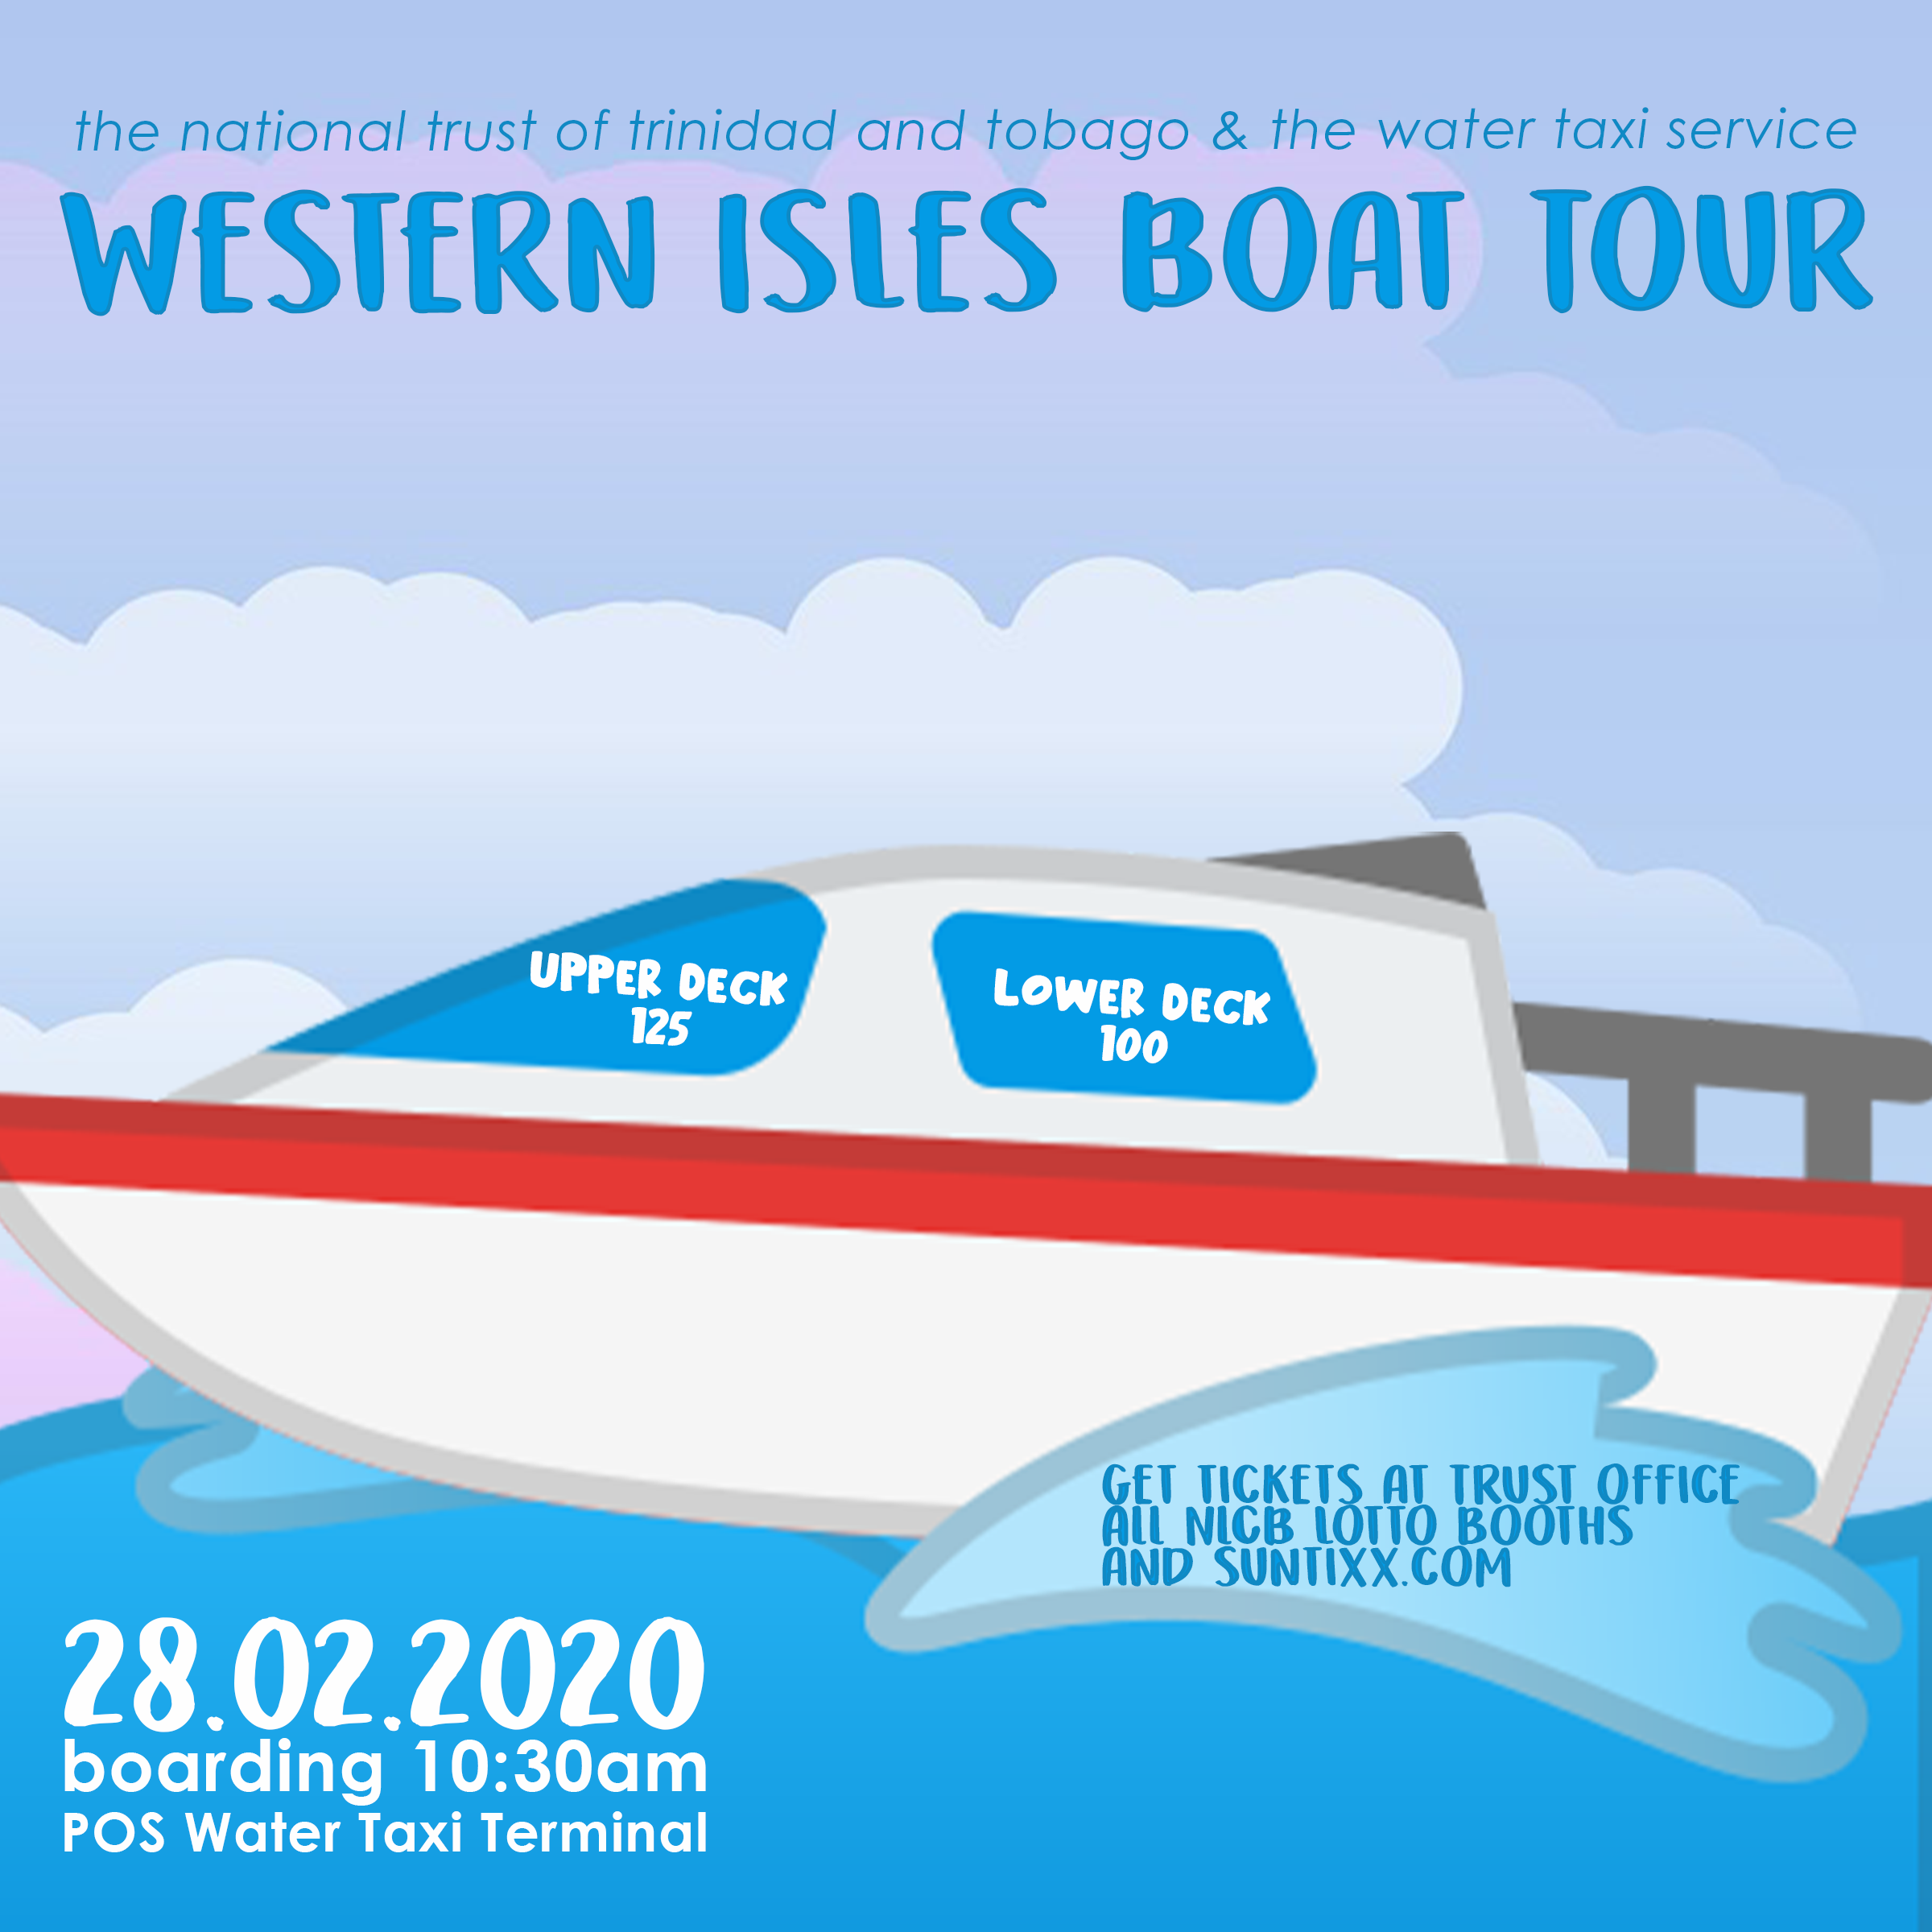 Western Isles Boat Tours